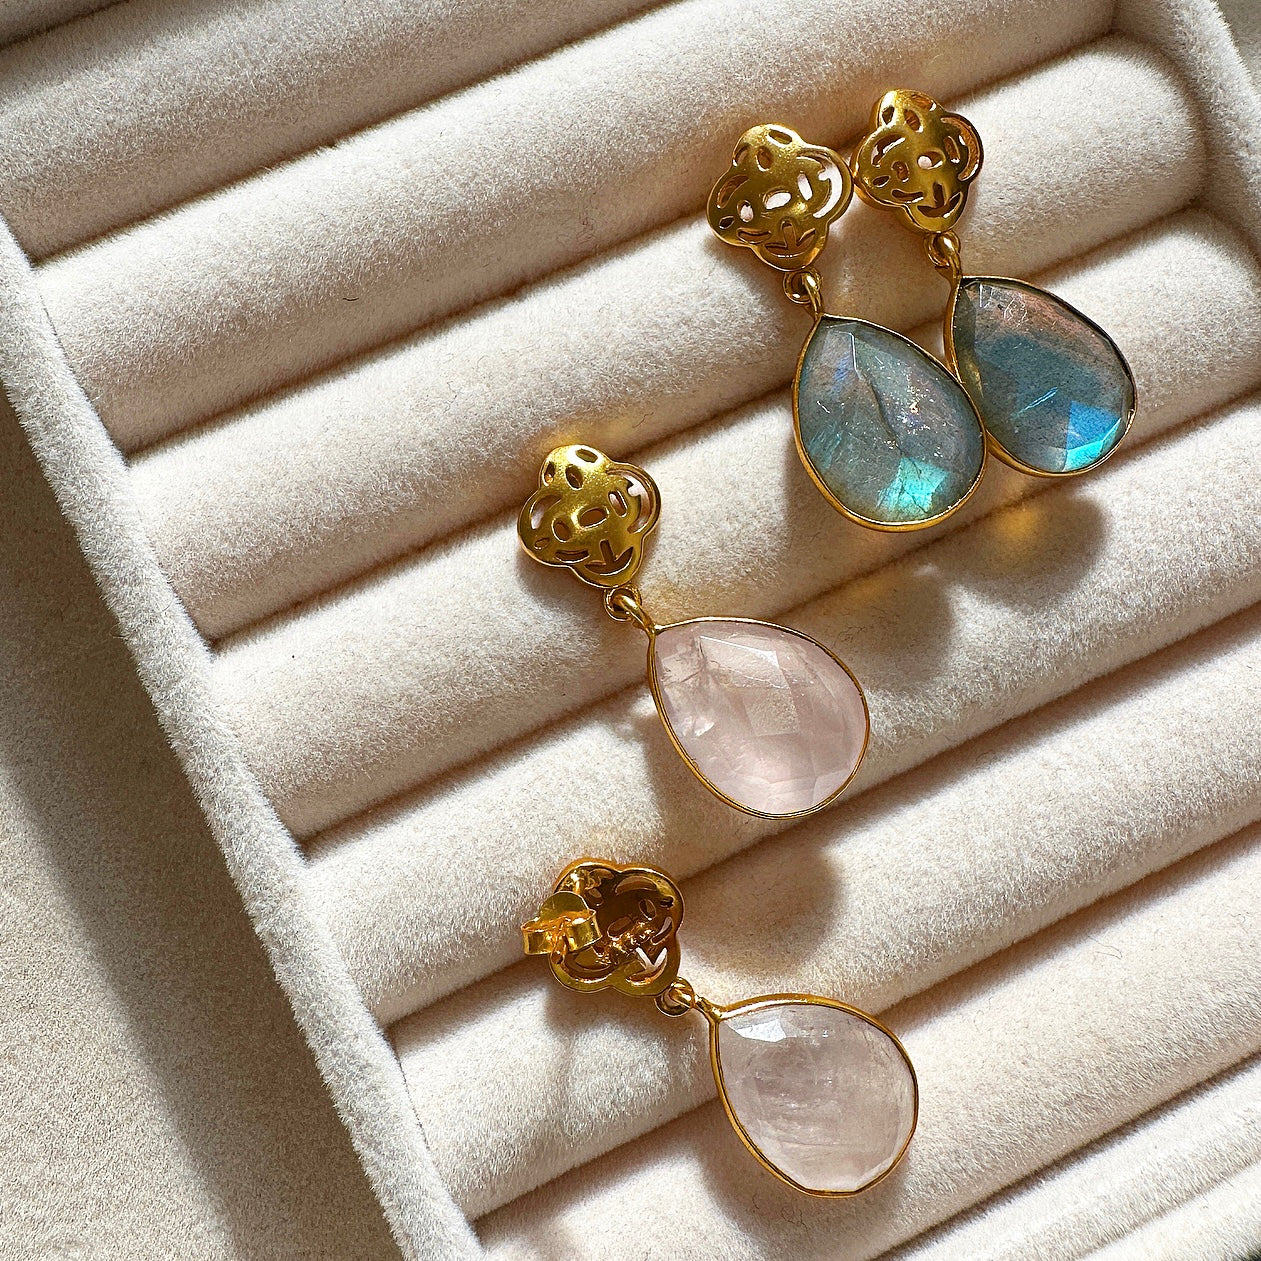 Crystal Heirloom Earrings by Ahseya & Co boast two beautiful stones- rose quartz and labradorite- set in 18k gold-plated sterling silver. These eye-catching earrings will make a statement with their unique variety of colors and textures.  Earring drop 3.5cm